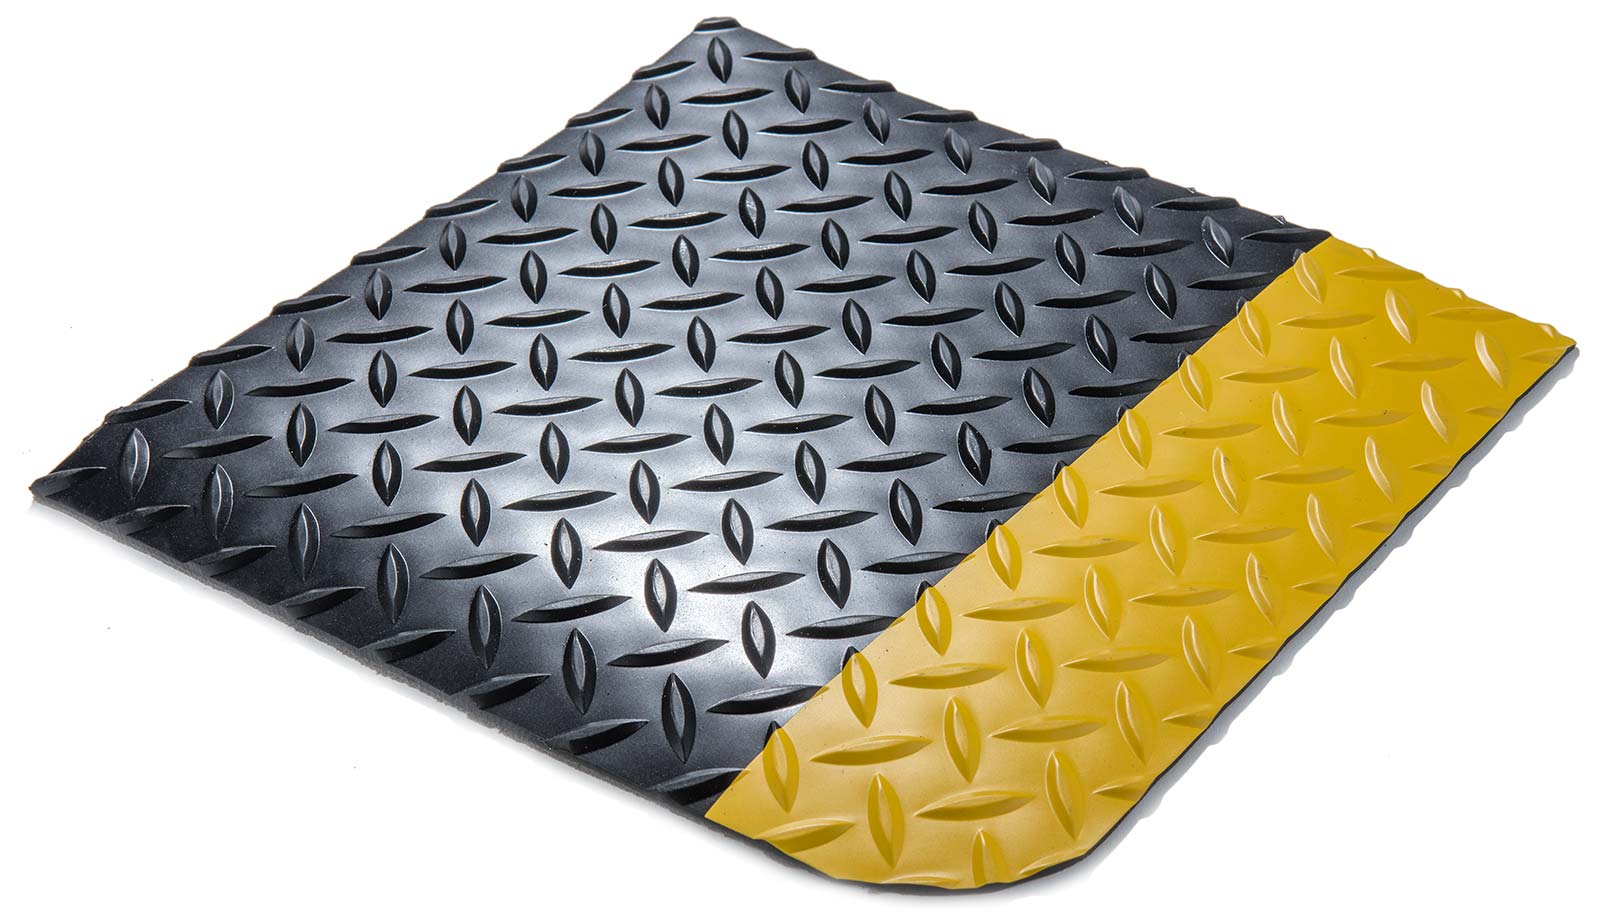 https://amarcoproducts.com/_media/products/diamond-step-anti-fatigue-mat/images/diamond-step-anti-fatigue-main.jpg